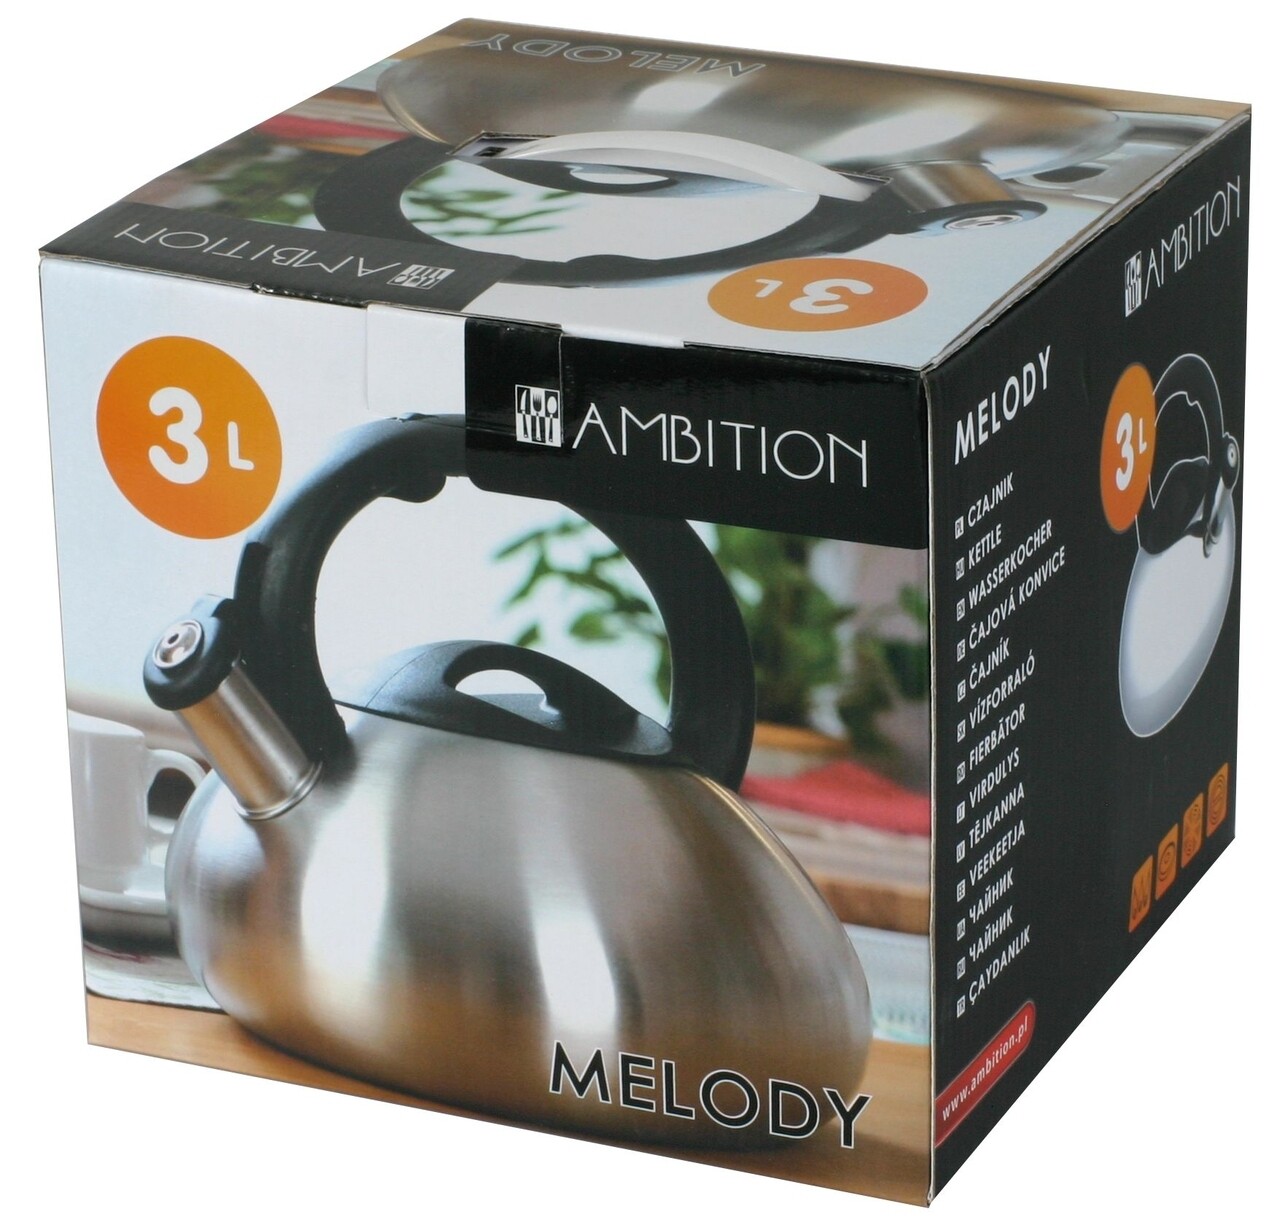 Ceainic inox Melody, Ambition, 3 L